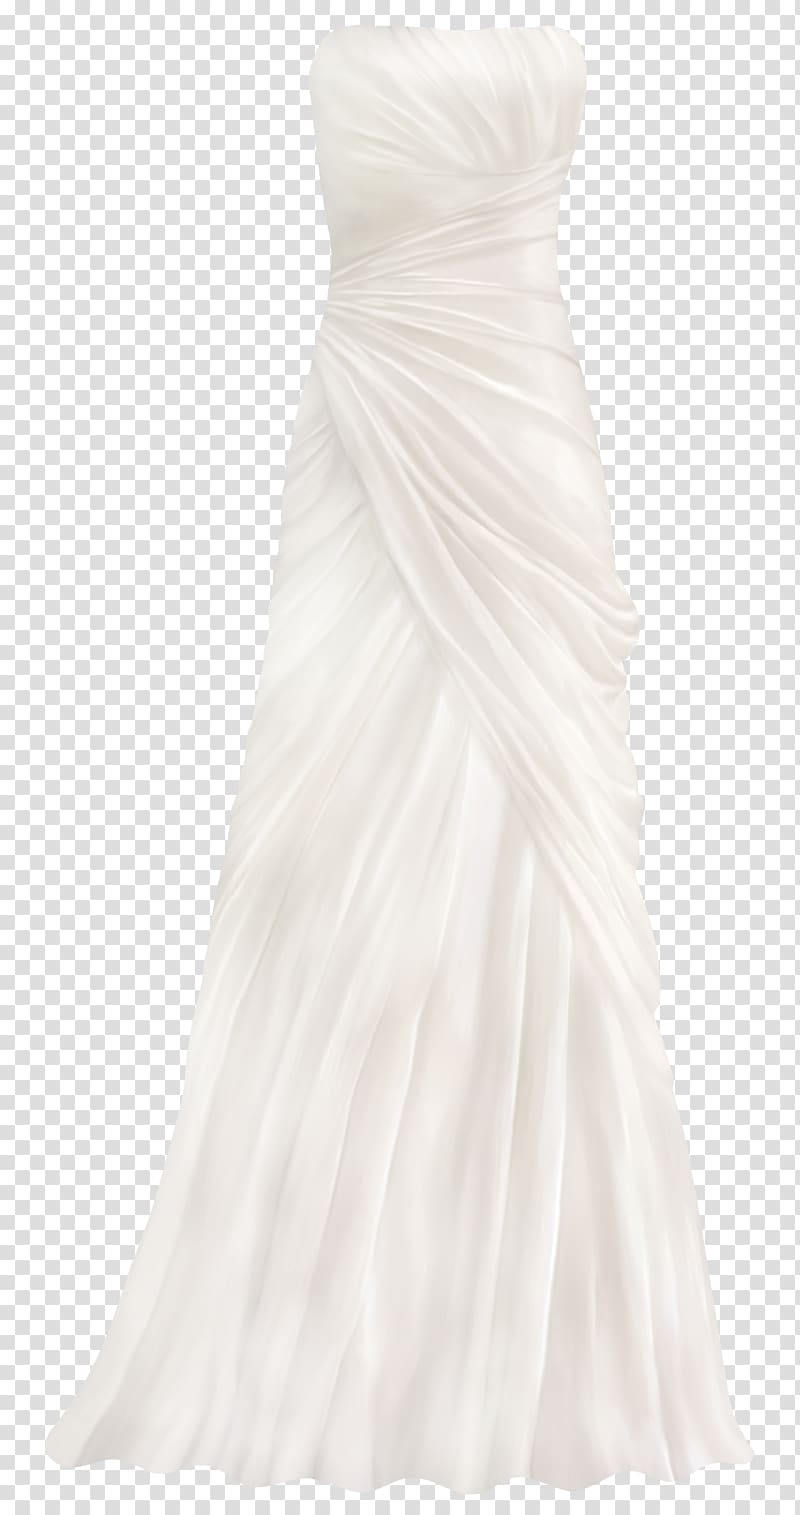 Wedding dress Clothing Gown Bridesmaid, dress transparent background PNG clipart